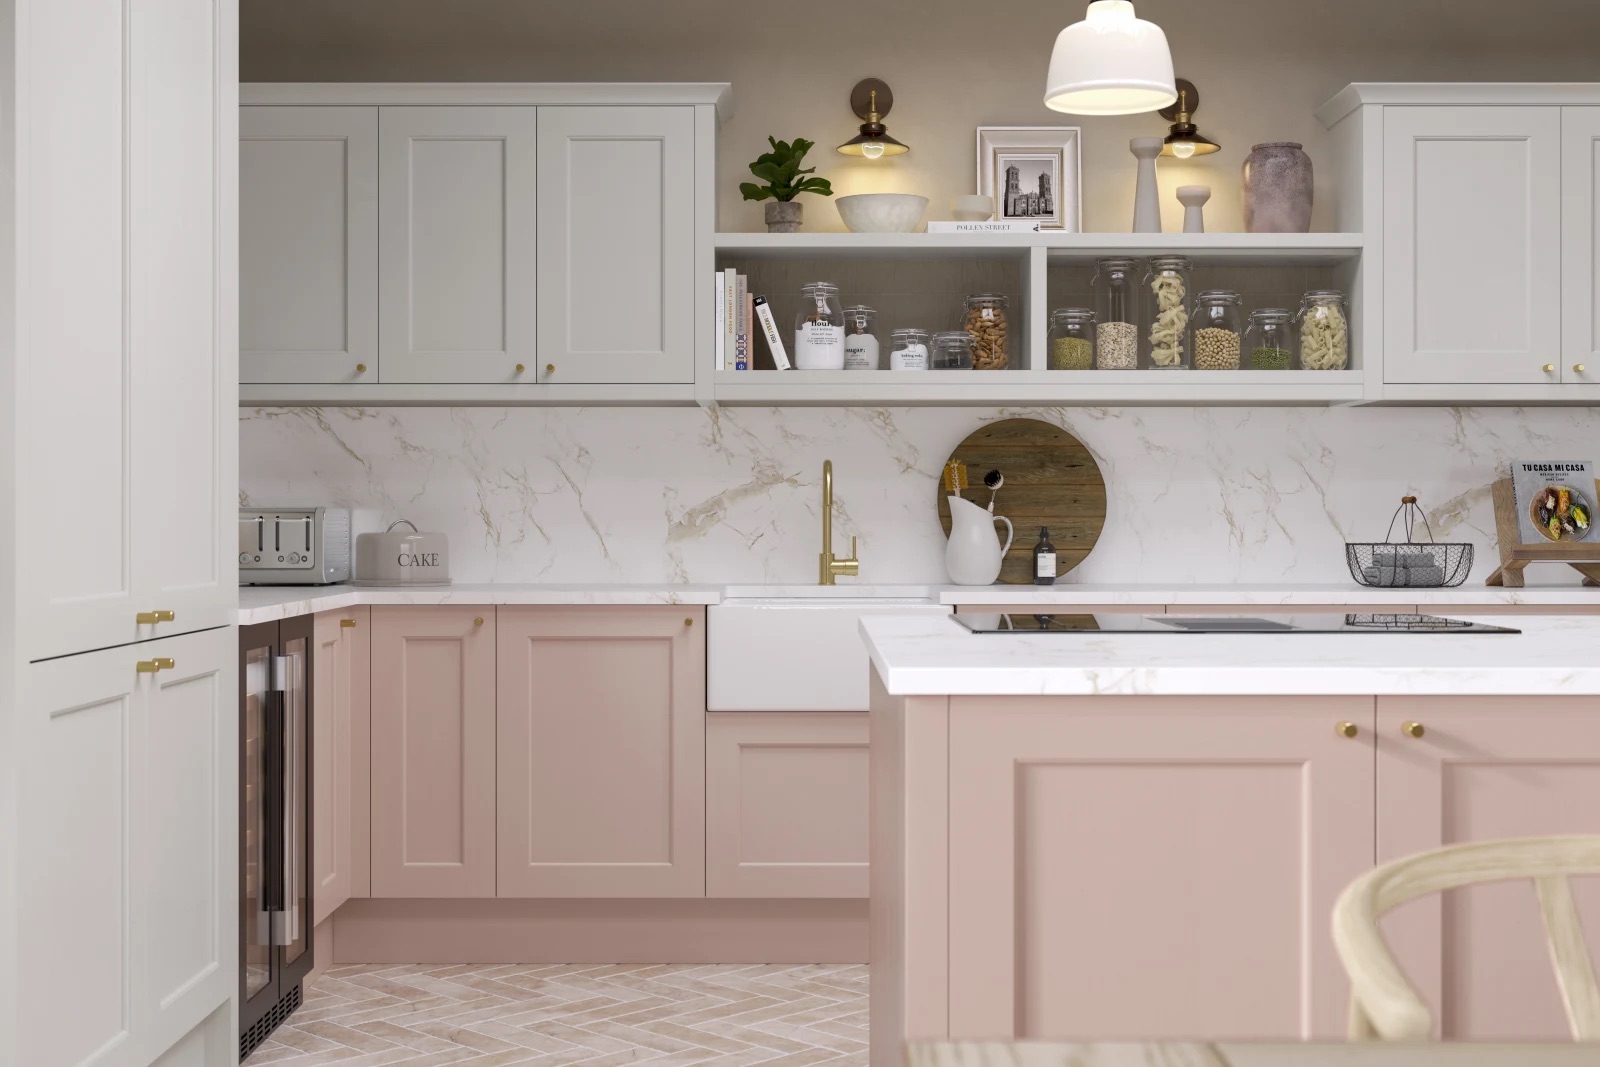 Pastel Kitchen Ideas: 10 Spaces To Inspire A Color Refresh